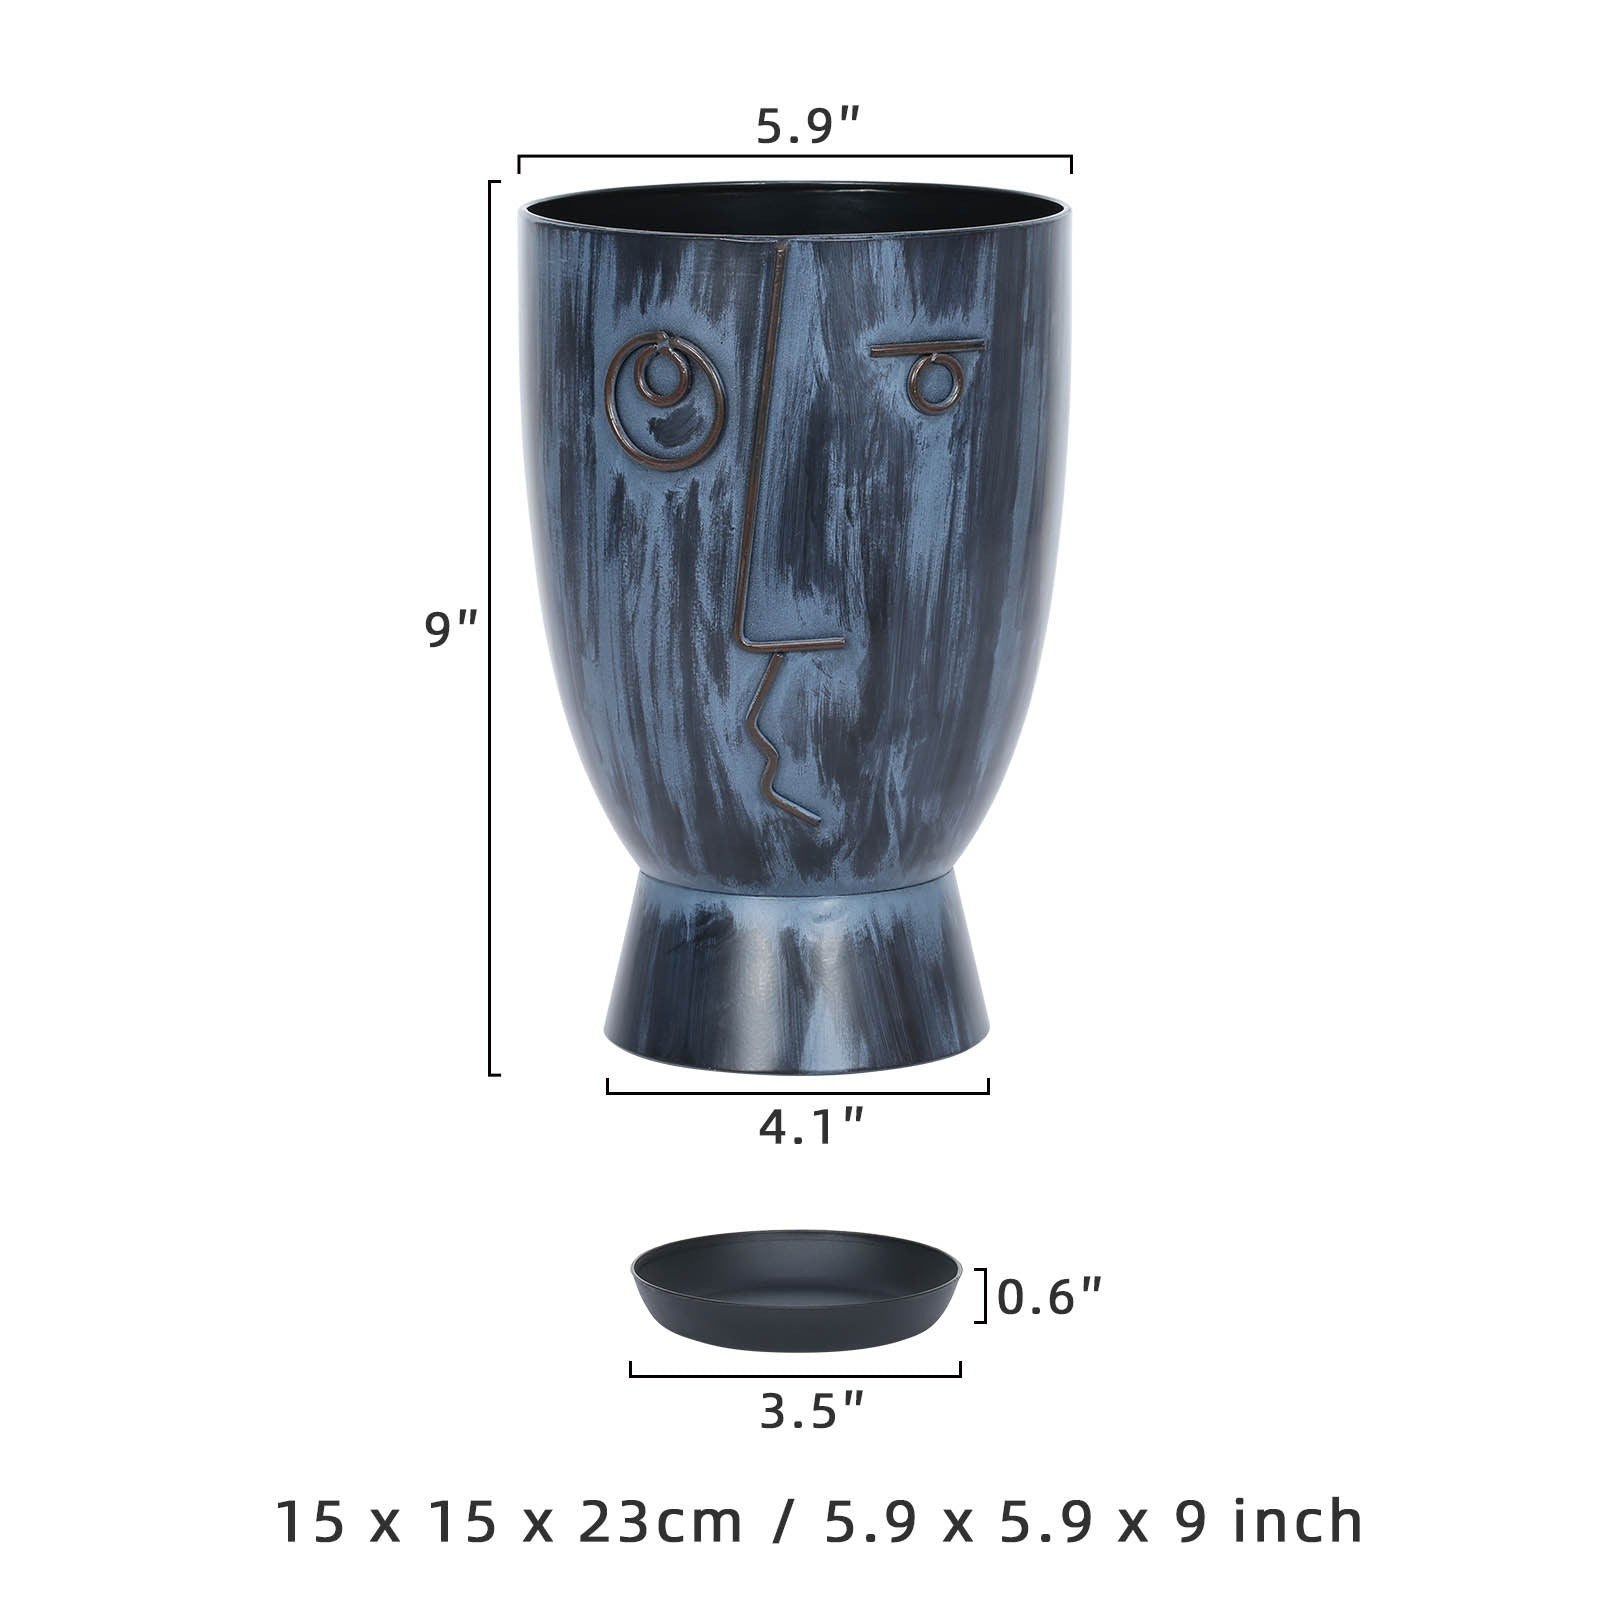 Picasso vase is waiting  for your favorite flowers and you!